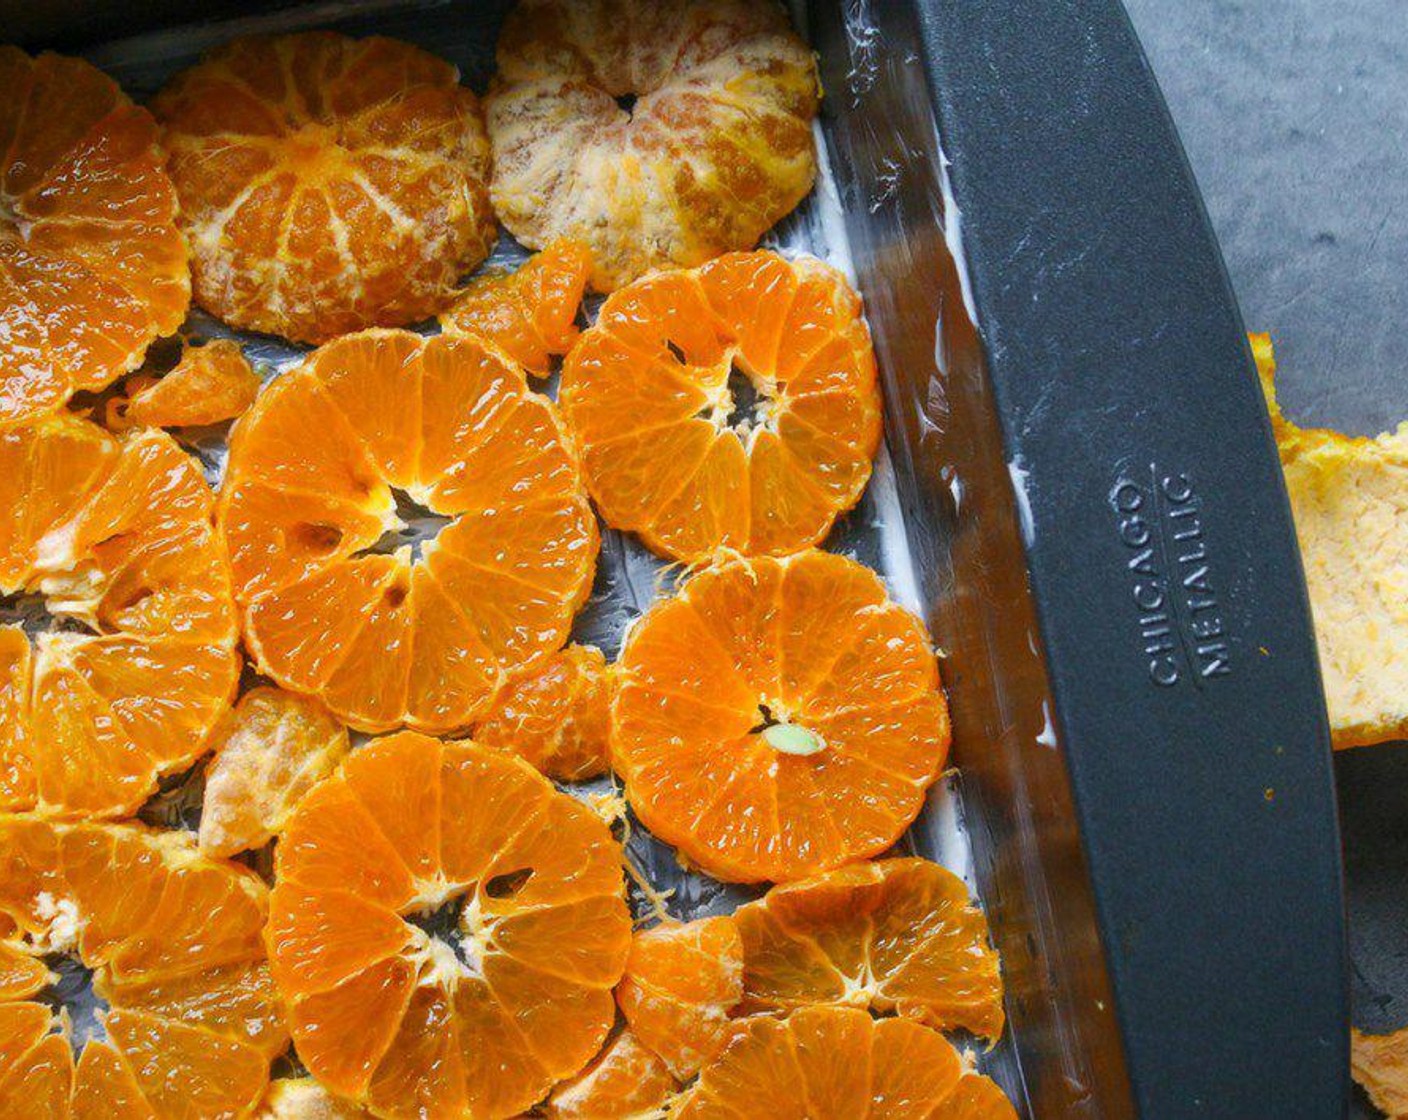 step 2 Zest the Oranges (4) until you have 1 1/2 tablespoons of orange zest. Then peel and slice all the oranges into 1/4-inch thick slices. Place the slices onto the bottom of the greased 9x13 pan in a single layer. You want as little open space as possible. Set aside.